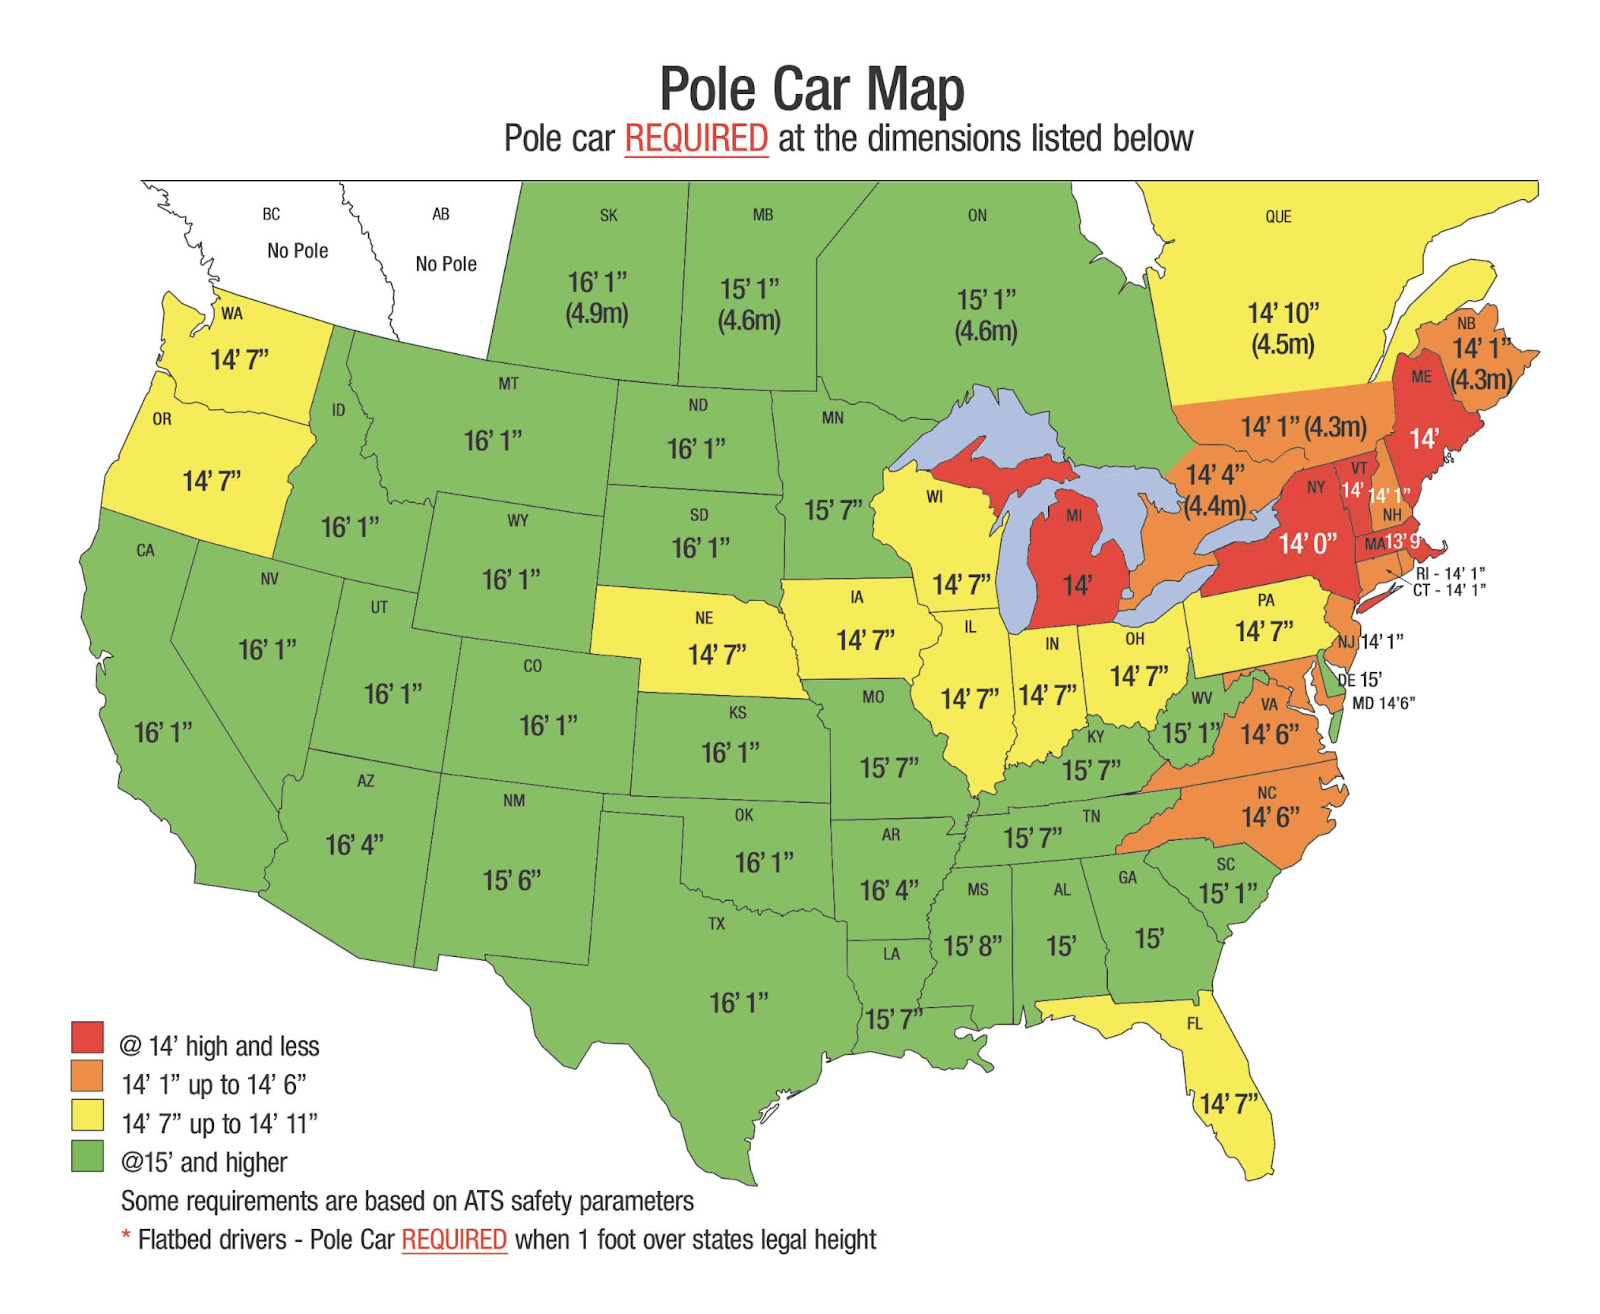 Escort Car Requirements for Height in Each State